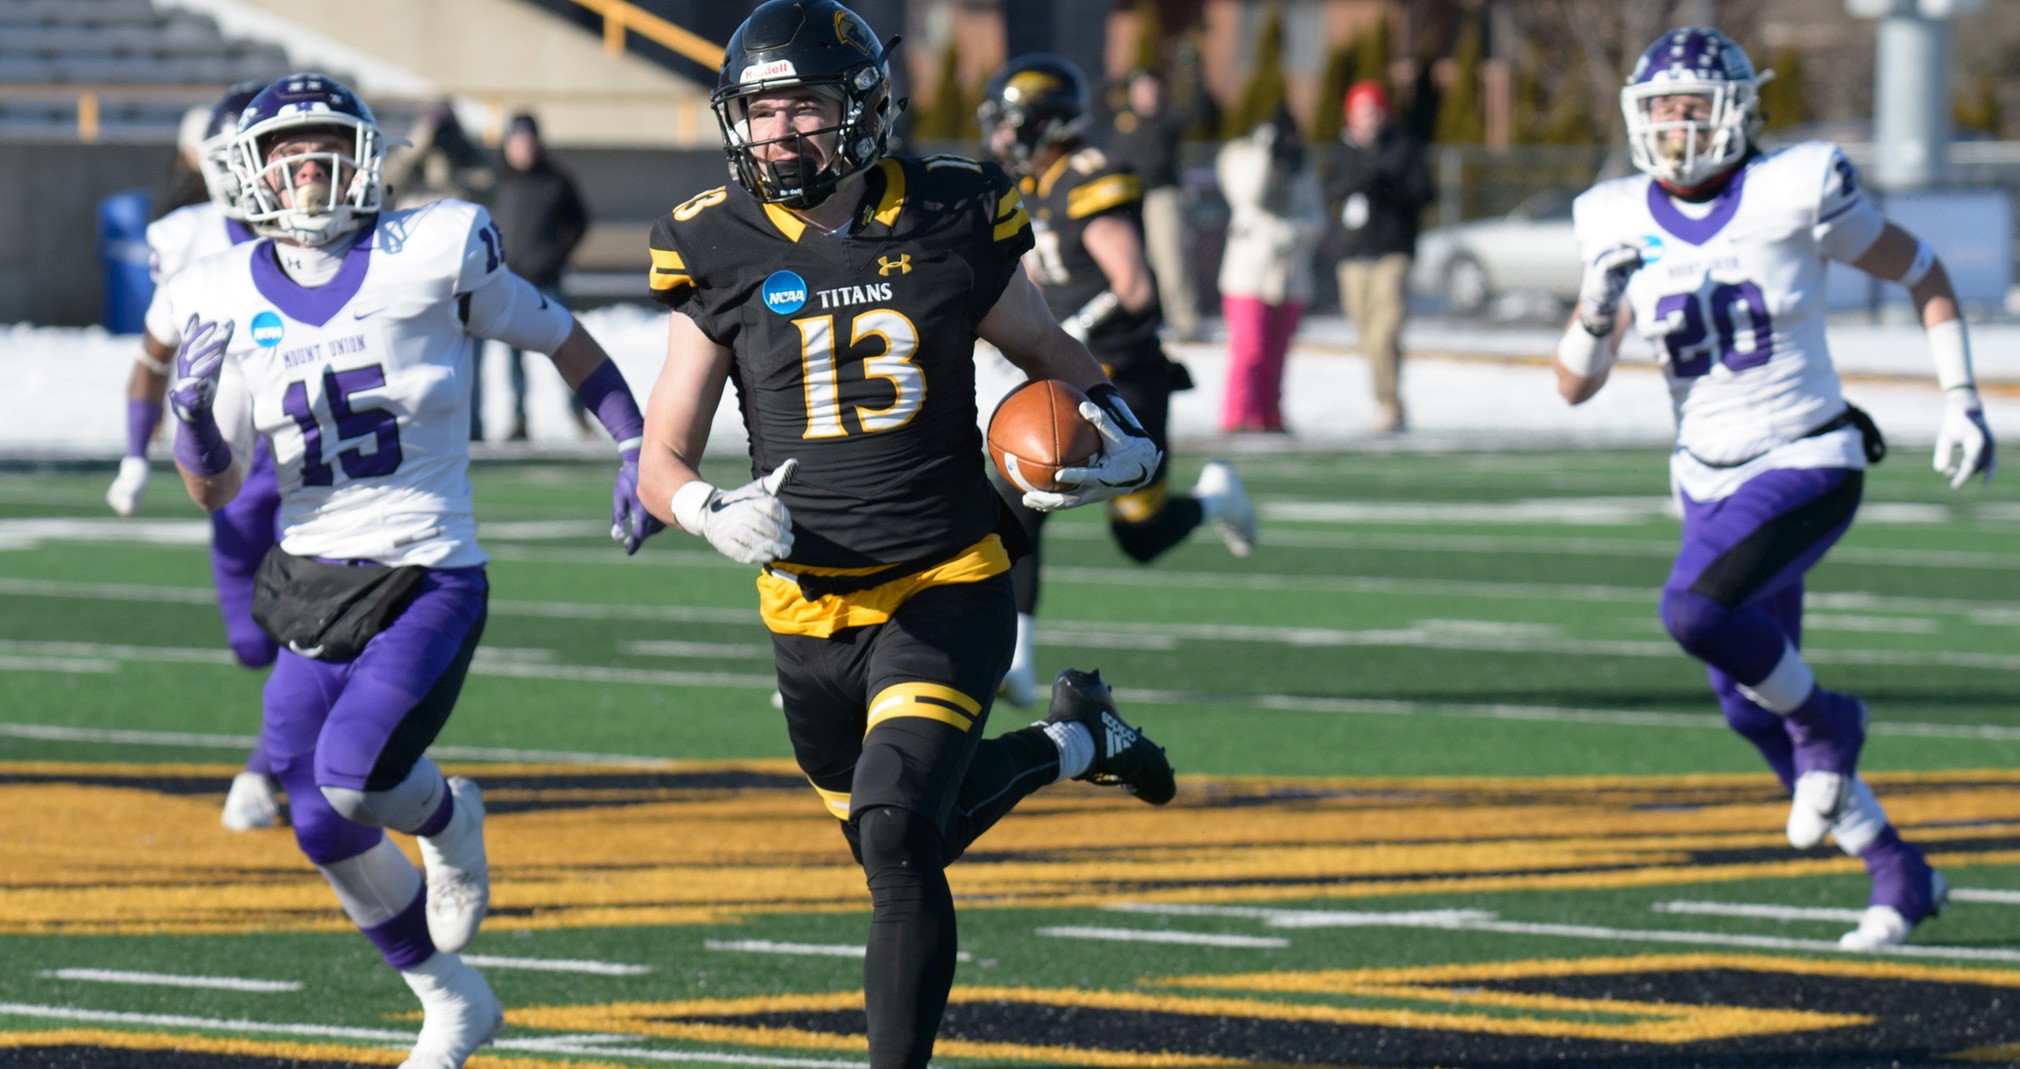 Sam Mentkowski finished his career as UW-Oshkosh's all-time leader with 180 receptions, 3,141 receiving yards and 27 touchdown catches.